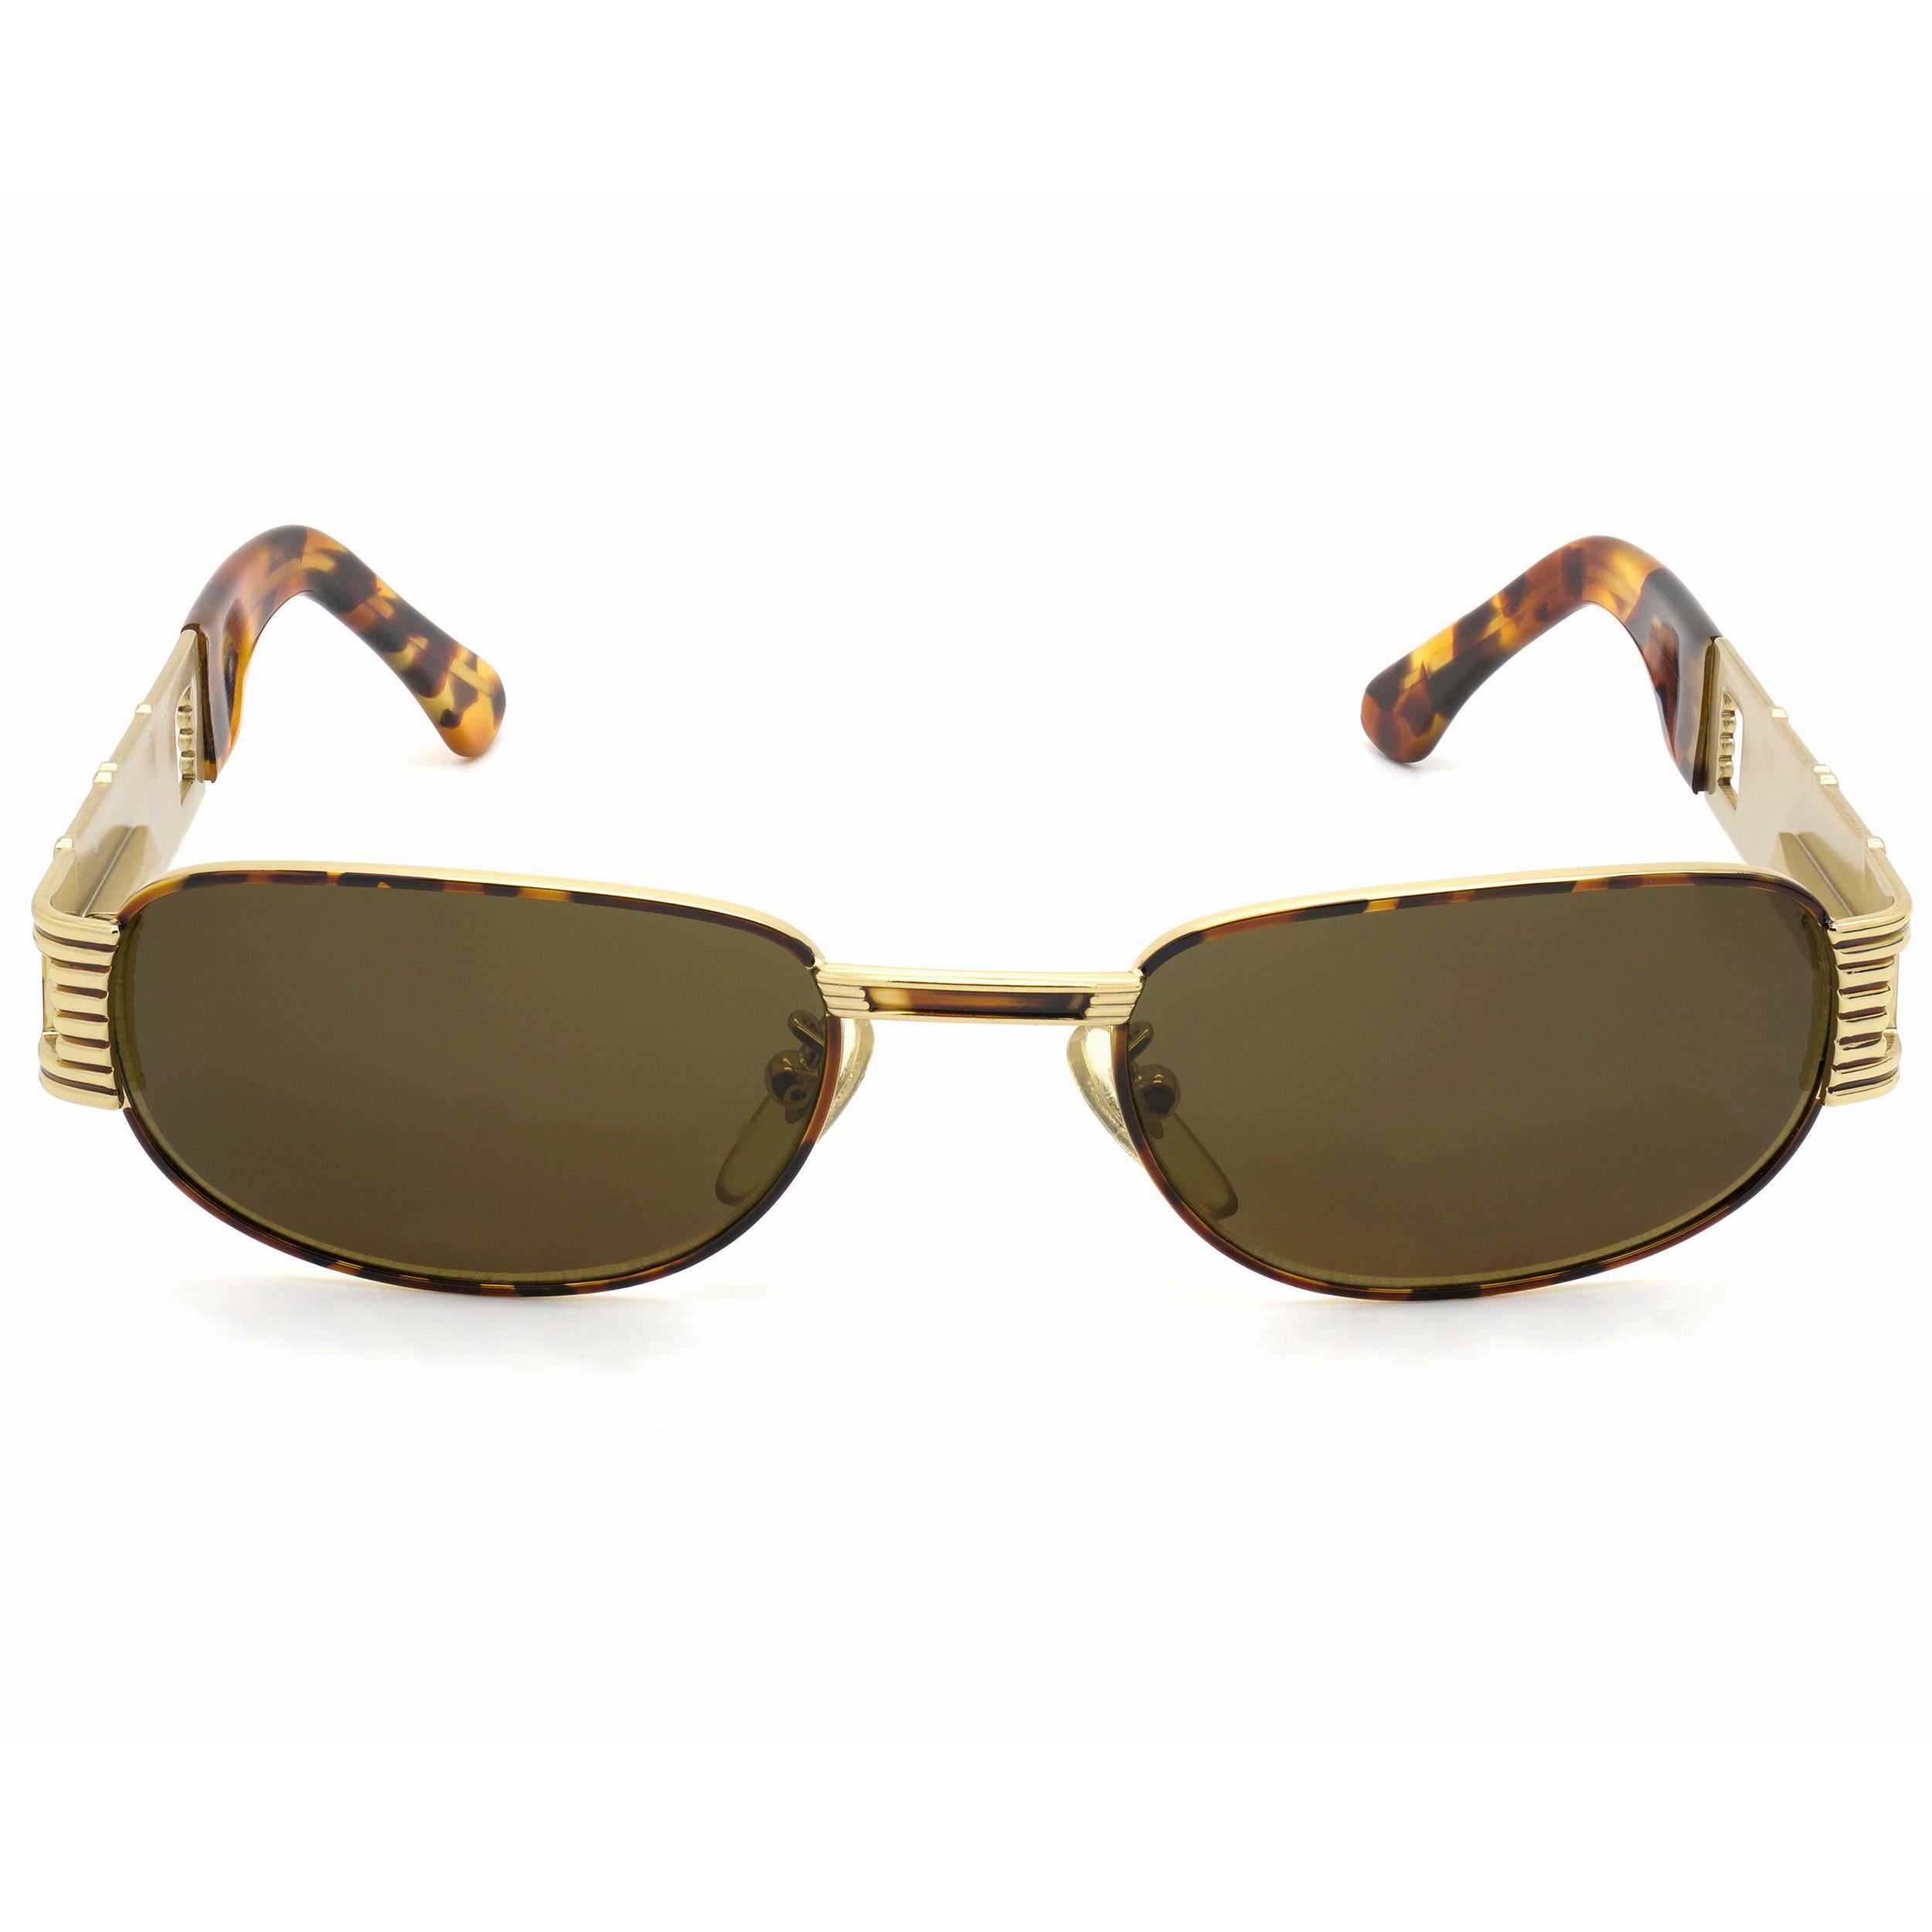 Prince Egon von Furstenberg vintage sunglasses

Before Diane, there was Egon. Egon was a prince from Switzerland and he married Diane and thus made Diane Von Furstenburg a princess. An acclaimed fashion designer, he was a contemporary of Gianni